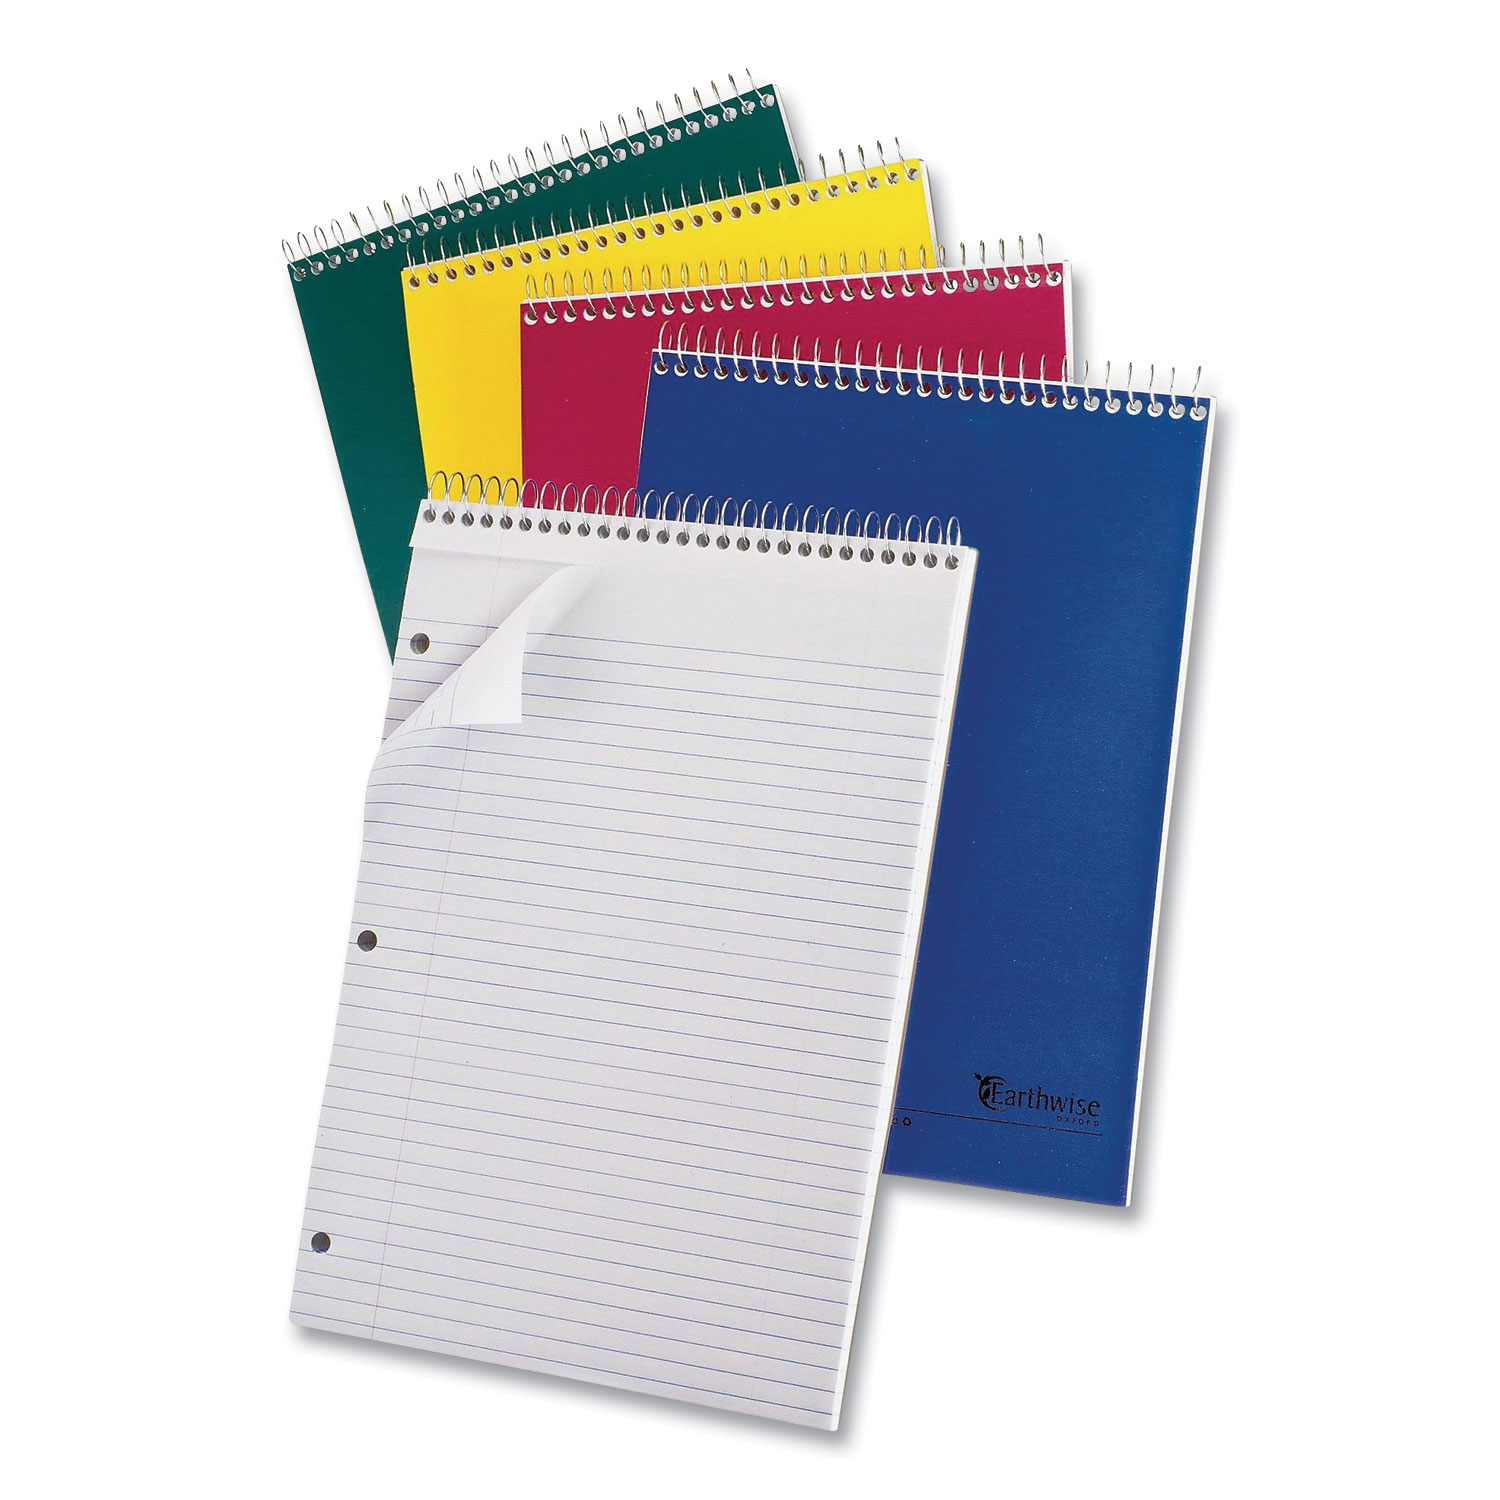 Oxford™ Earthwise by Oxford One-Subject Notebook, Medium/College Rule, Randomly Assorted Color Covers, 8.5 x 11.75, 80 Sheets